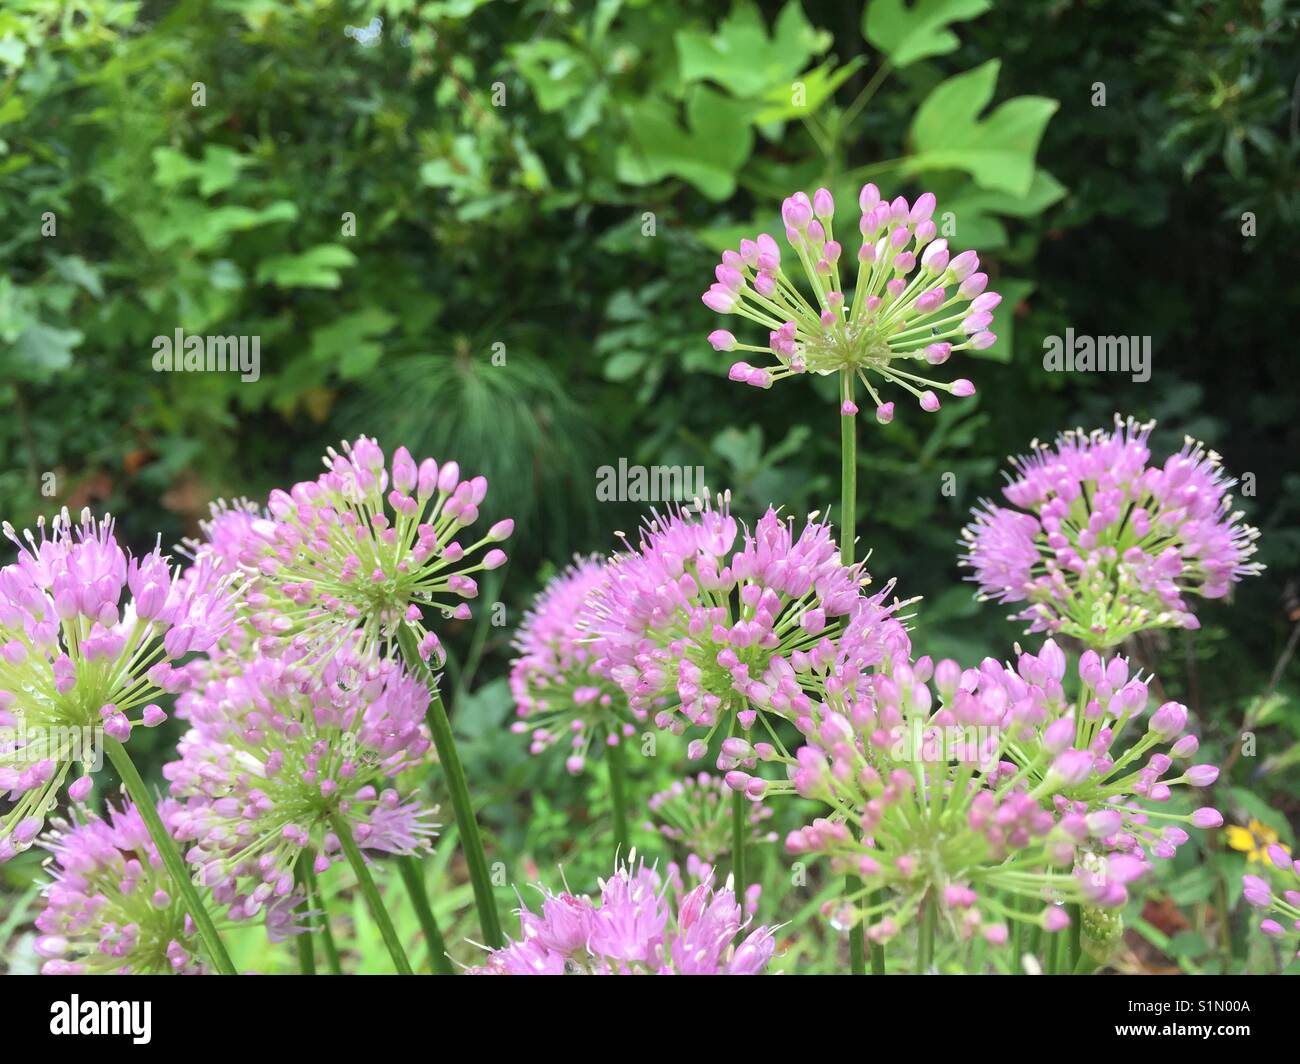 Interesting texture in the flower garden on this ornamental garlic Stock Photo